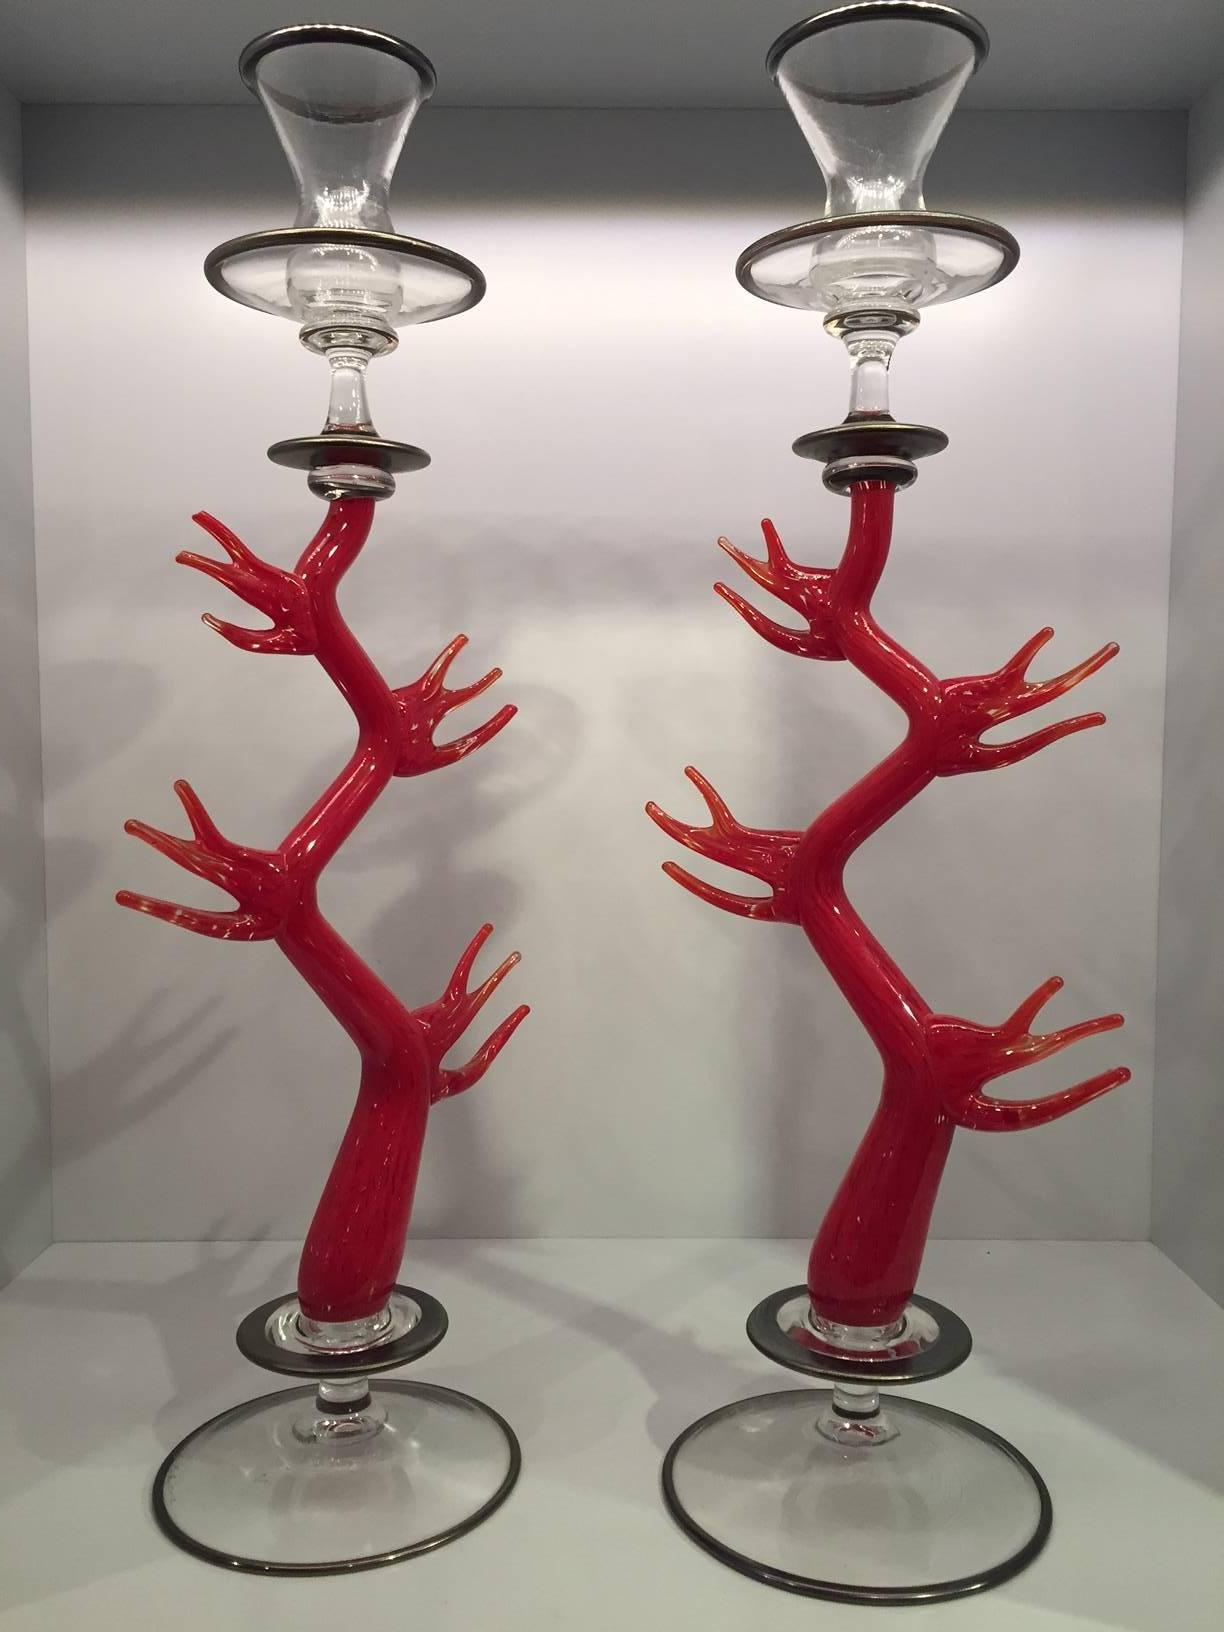 Beautiful pair of handblown glass red coral candlesticks. Amazing addition to any summer time table. Made exclusively in the USA for Creel and Gow.